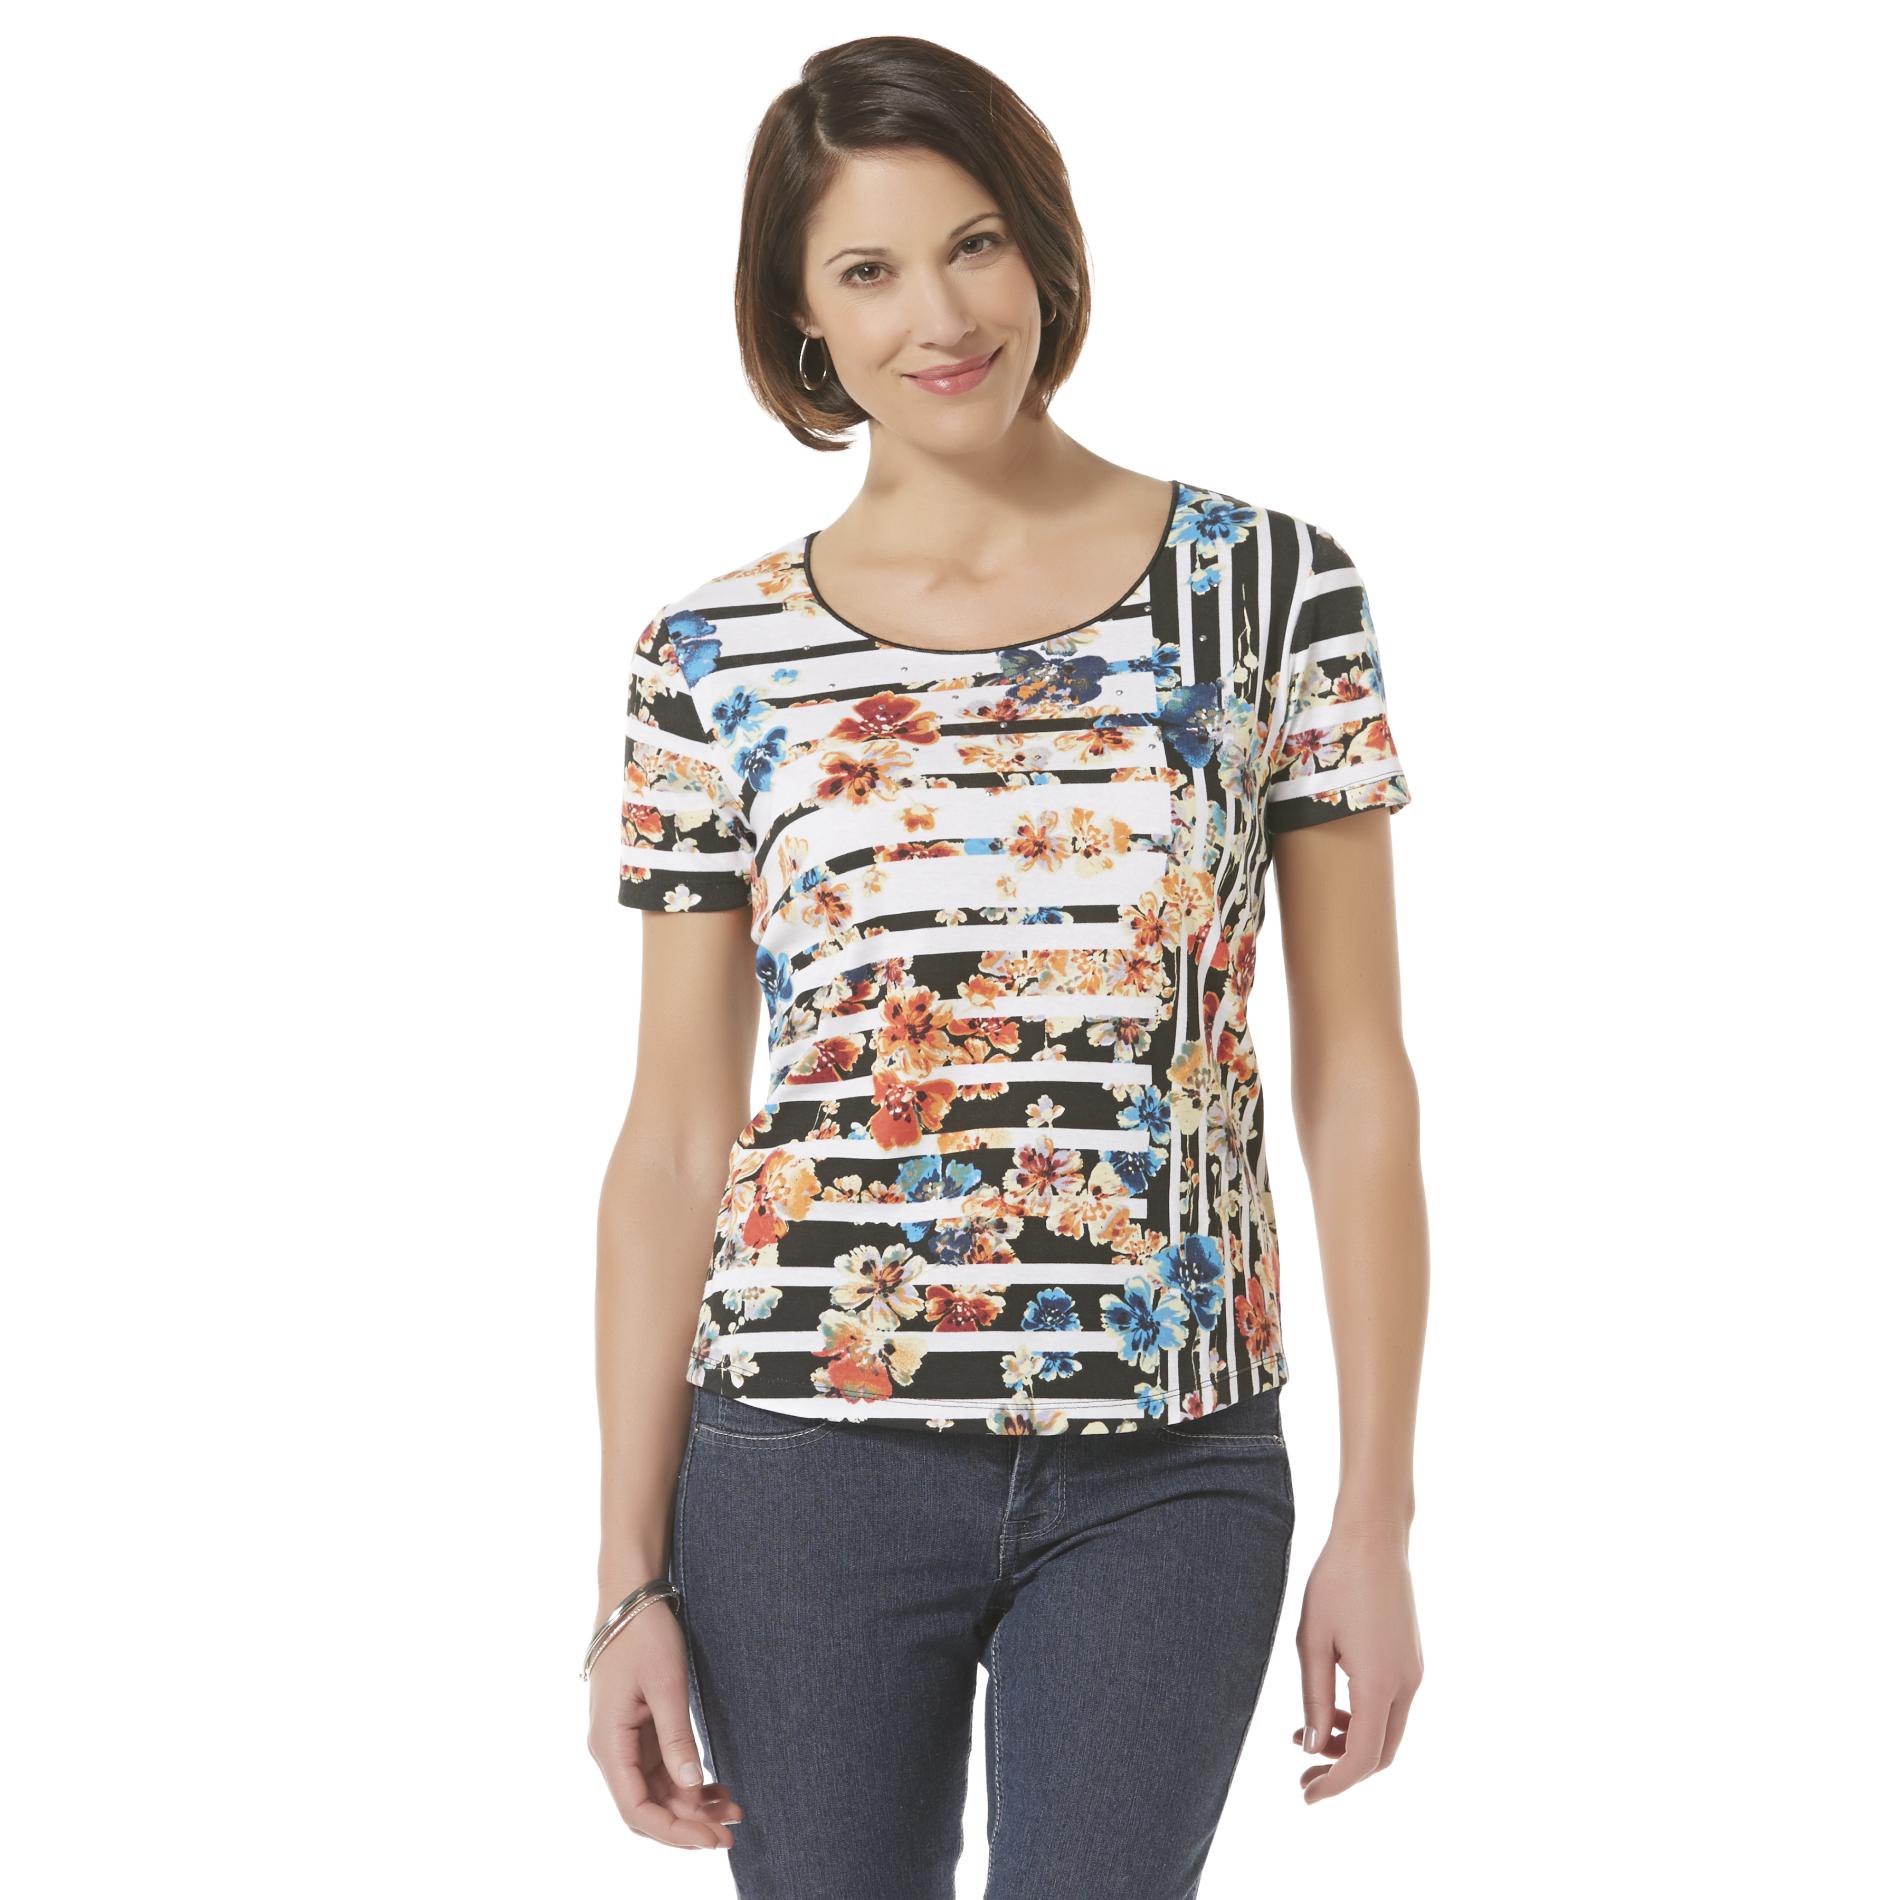 Basic Editions Women's Embellished High-Low T-Shirt - Floral